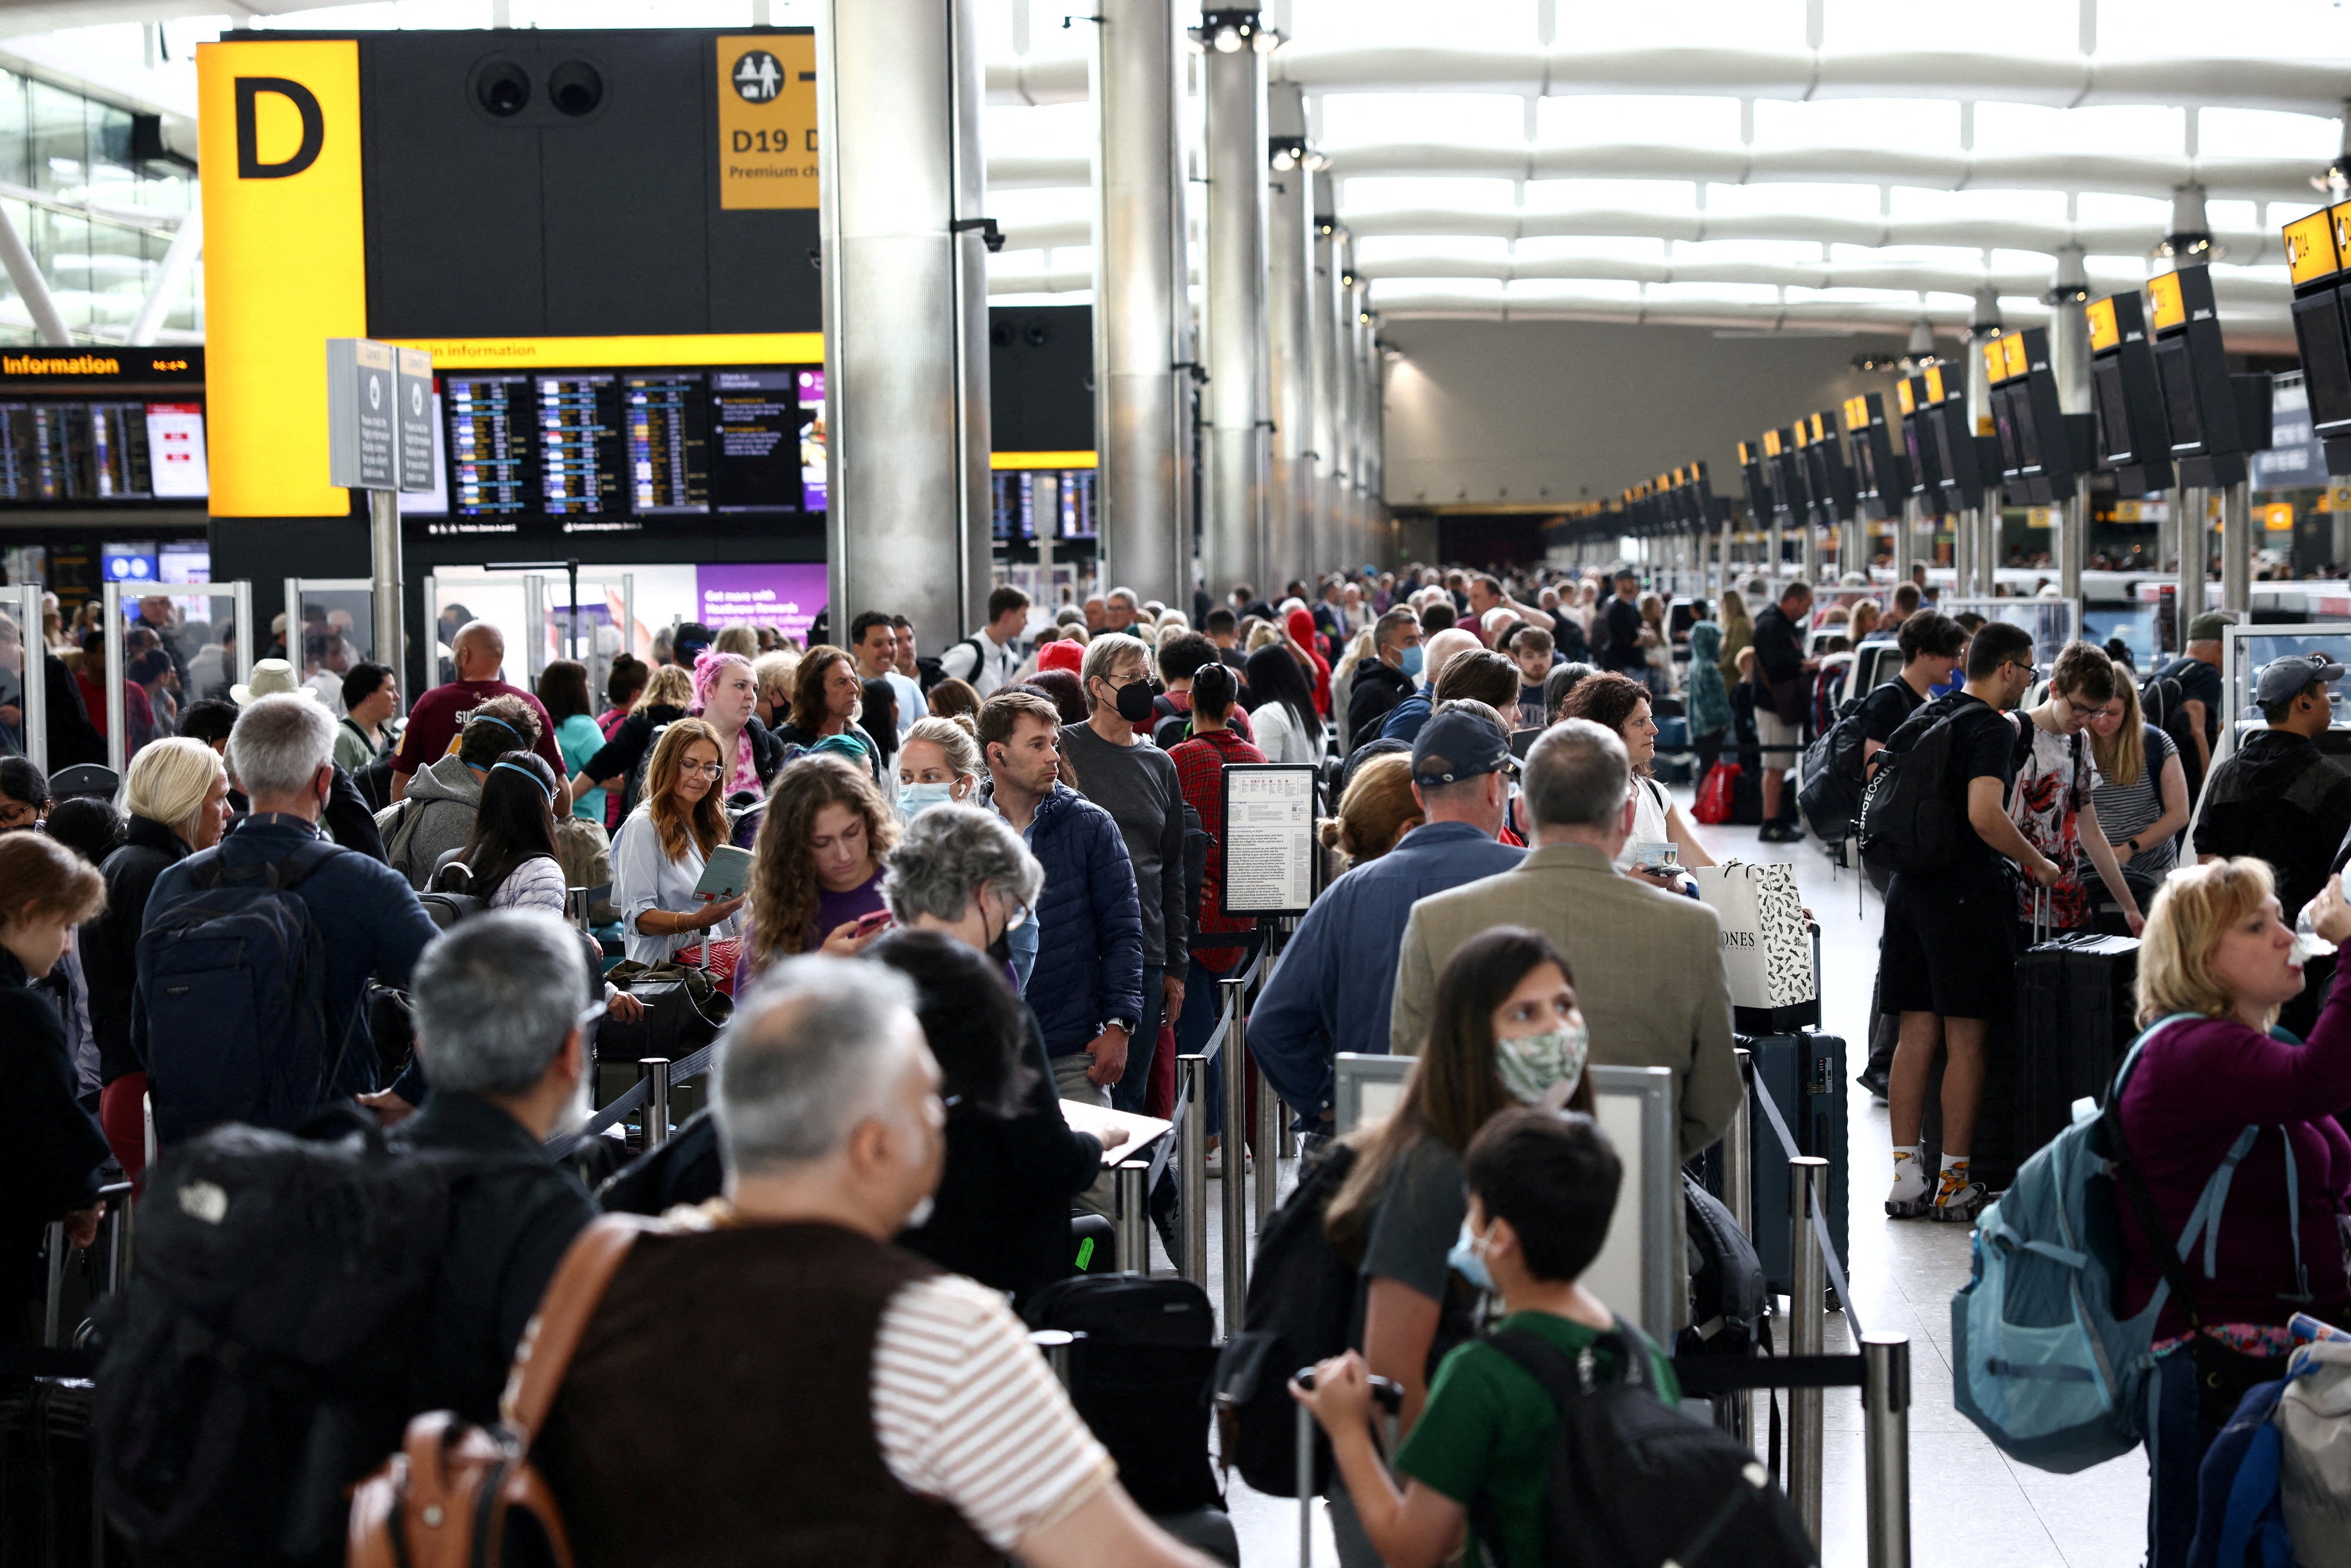 Passengers queue inside the departures terminal of Terminal 2 at Heathrow Airport